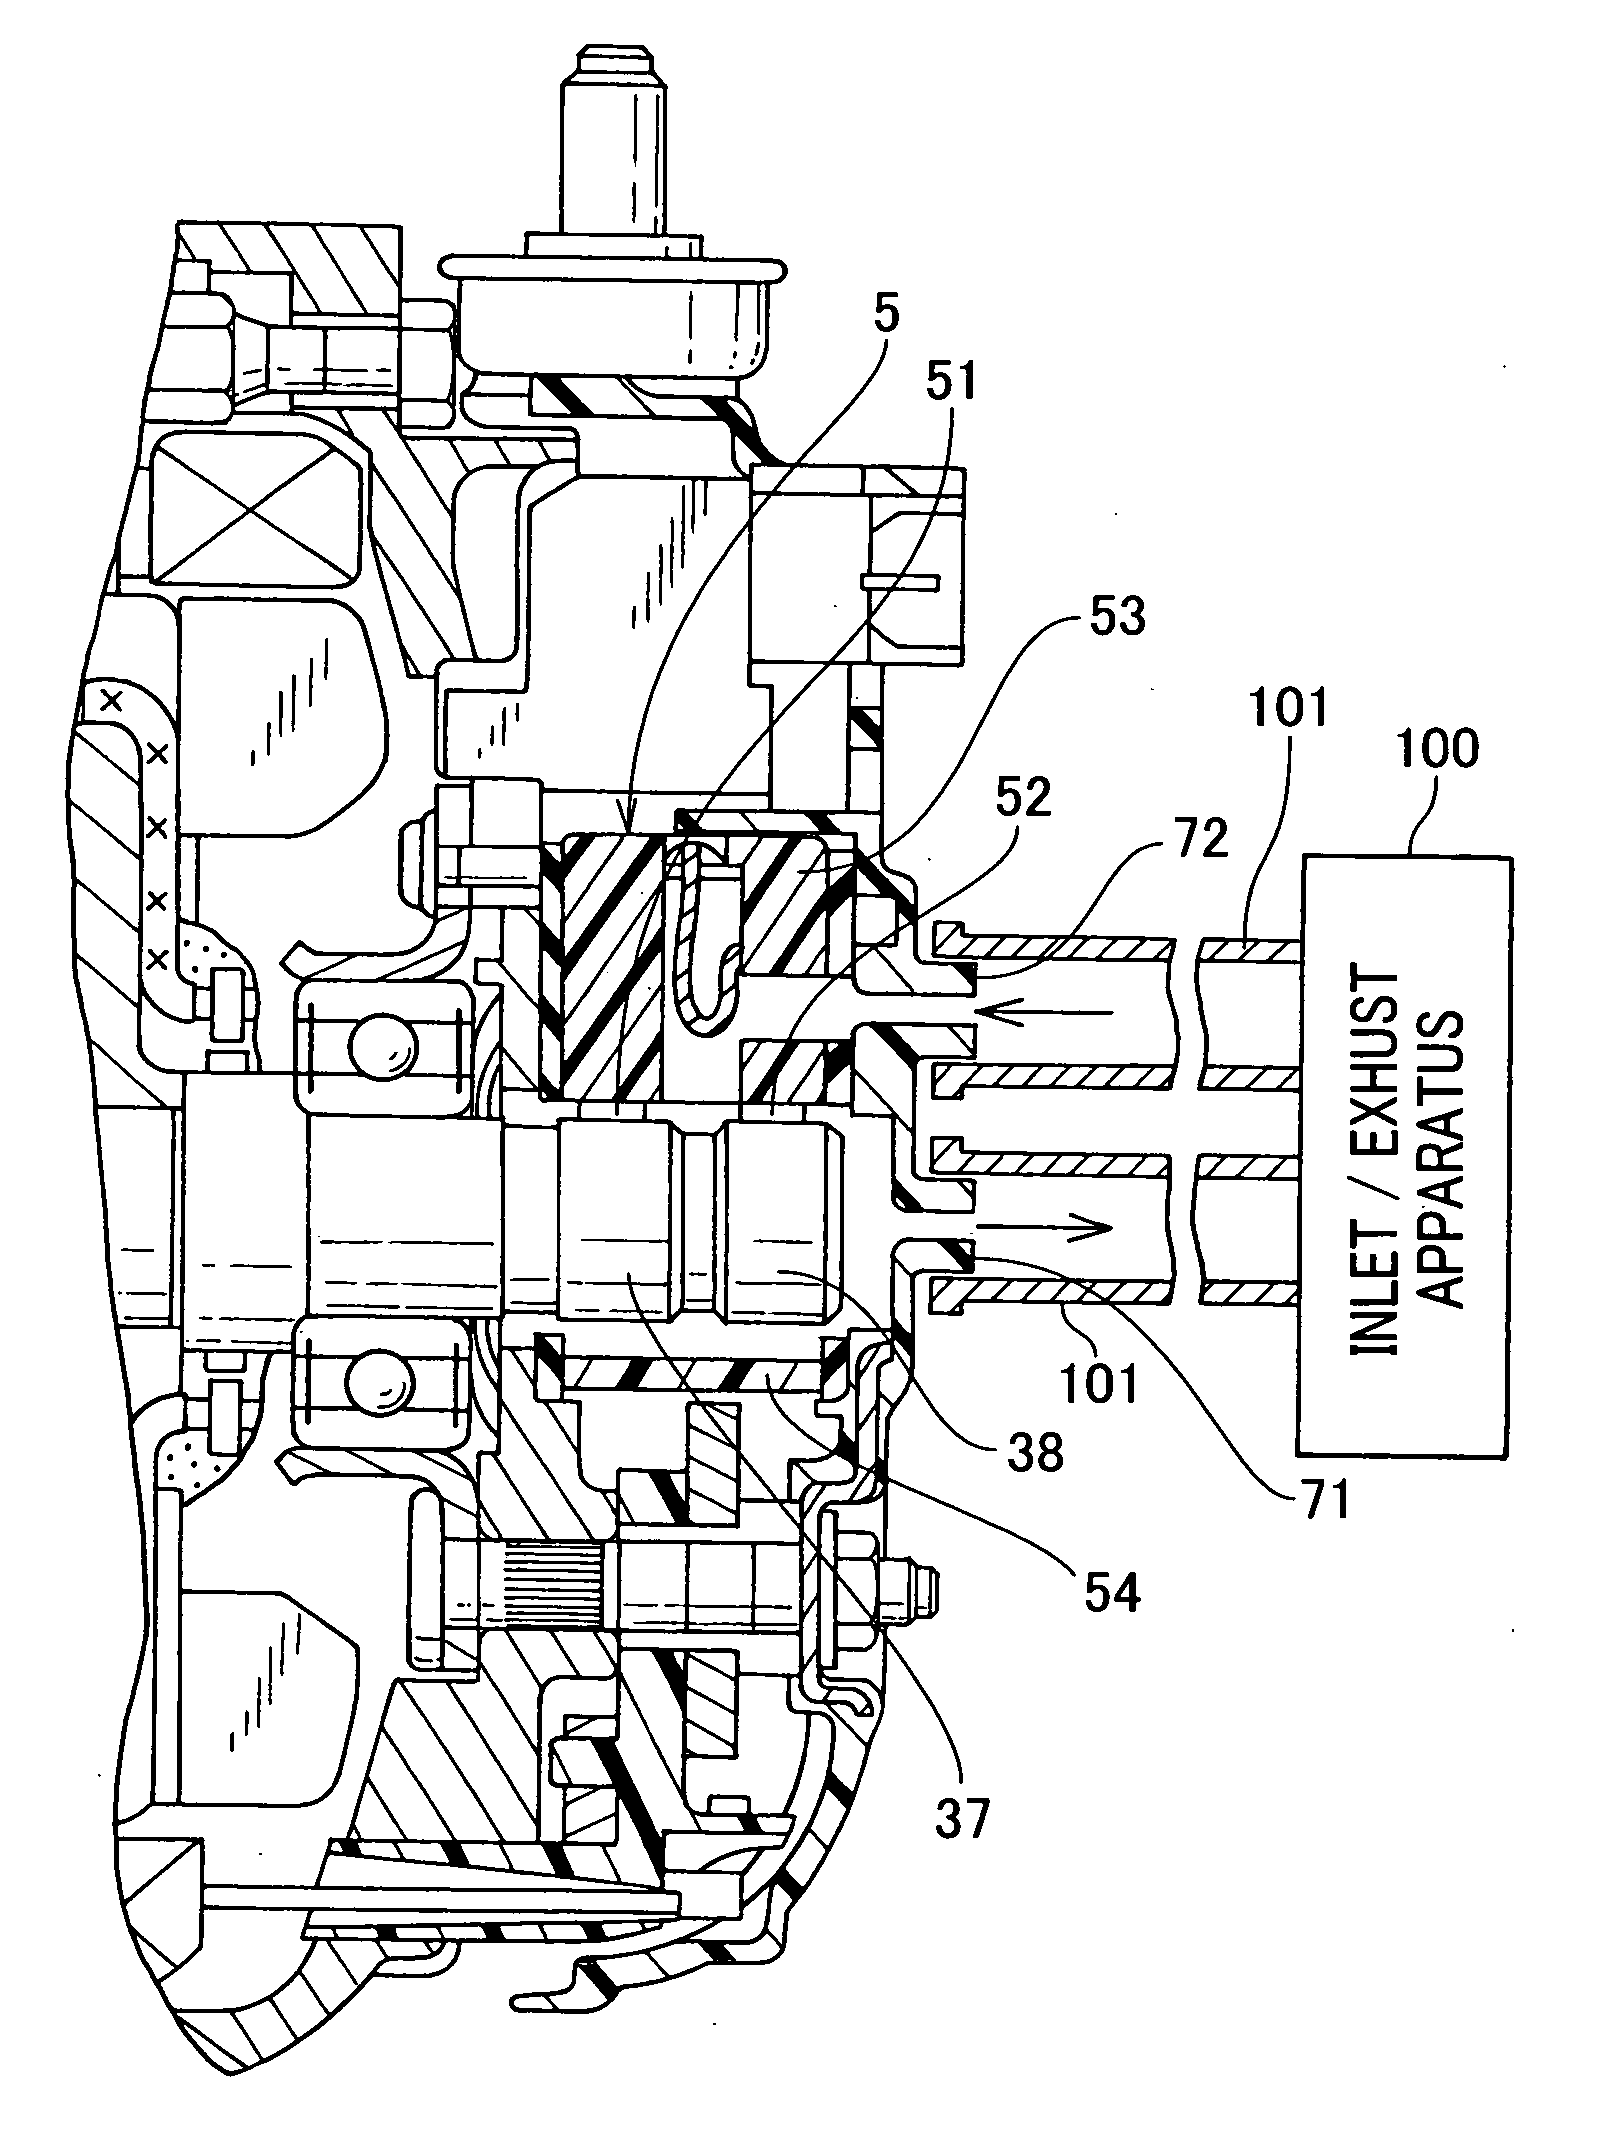 Vehicle alternator provided with brushes and slip rings